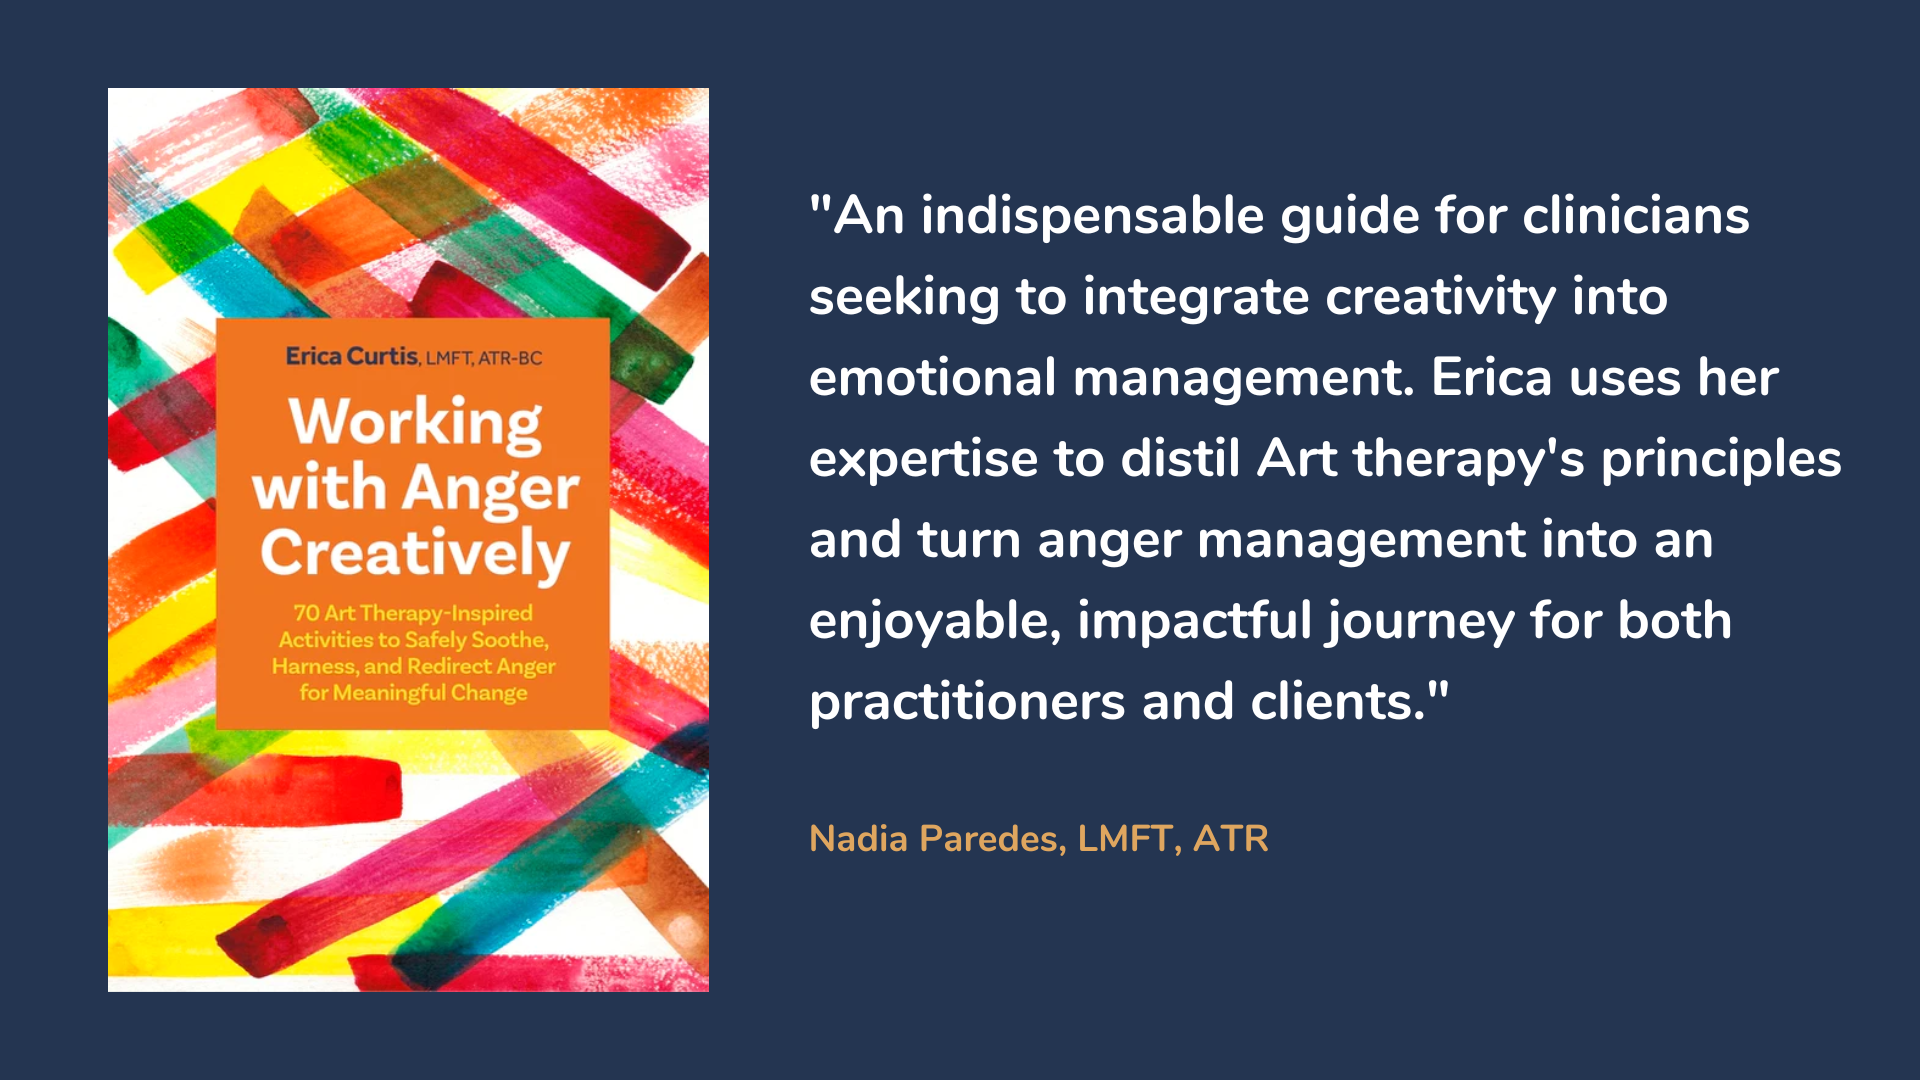 Working With Anger Creatively, book cover and book description